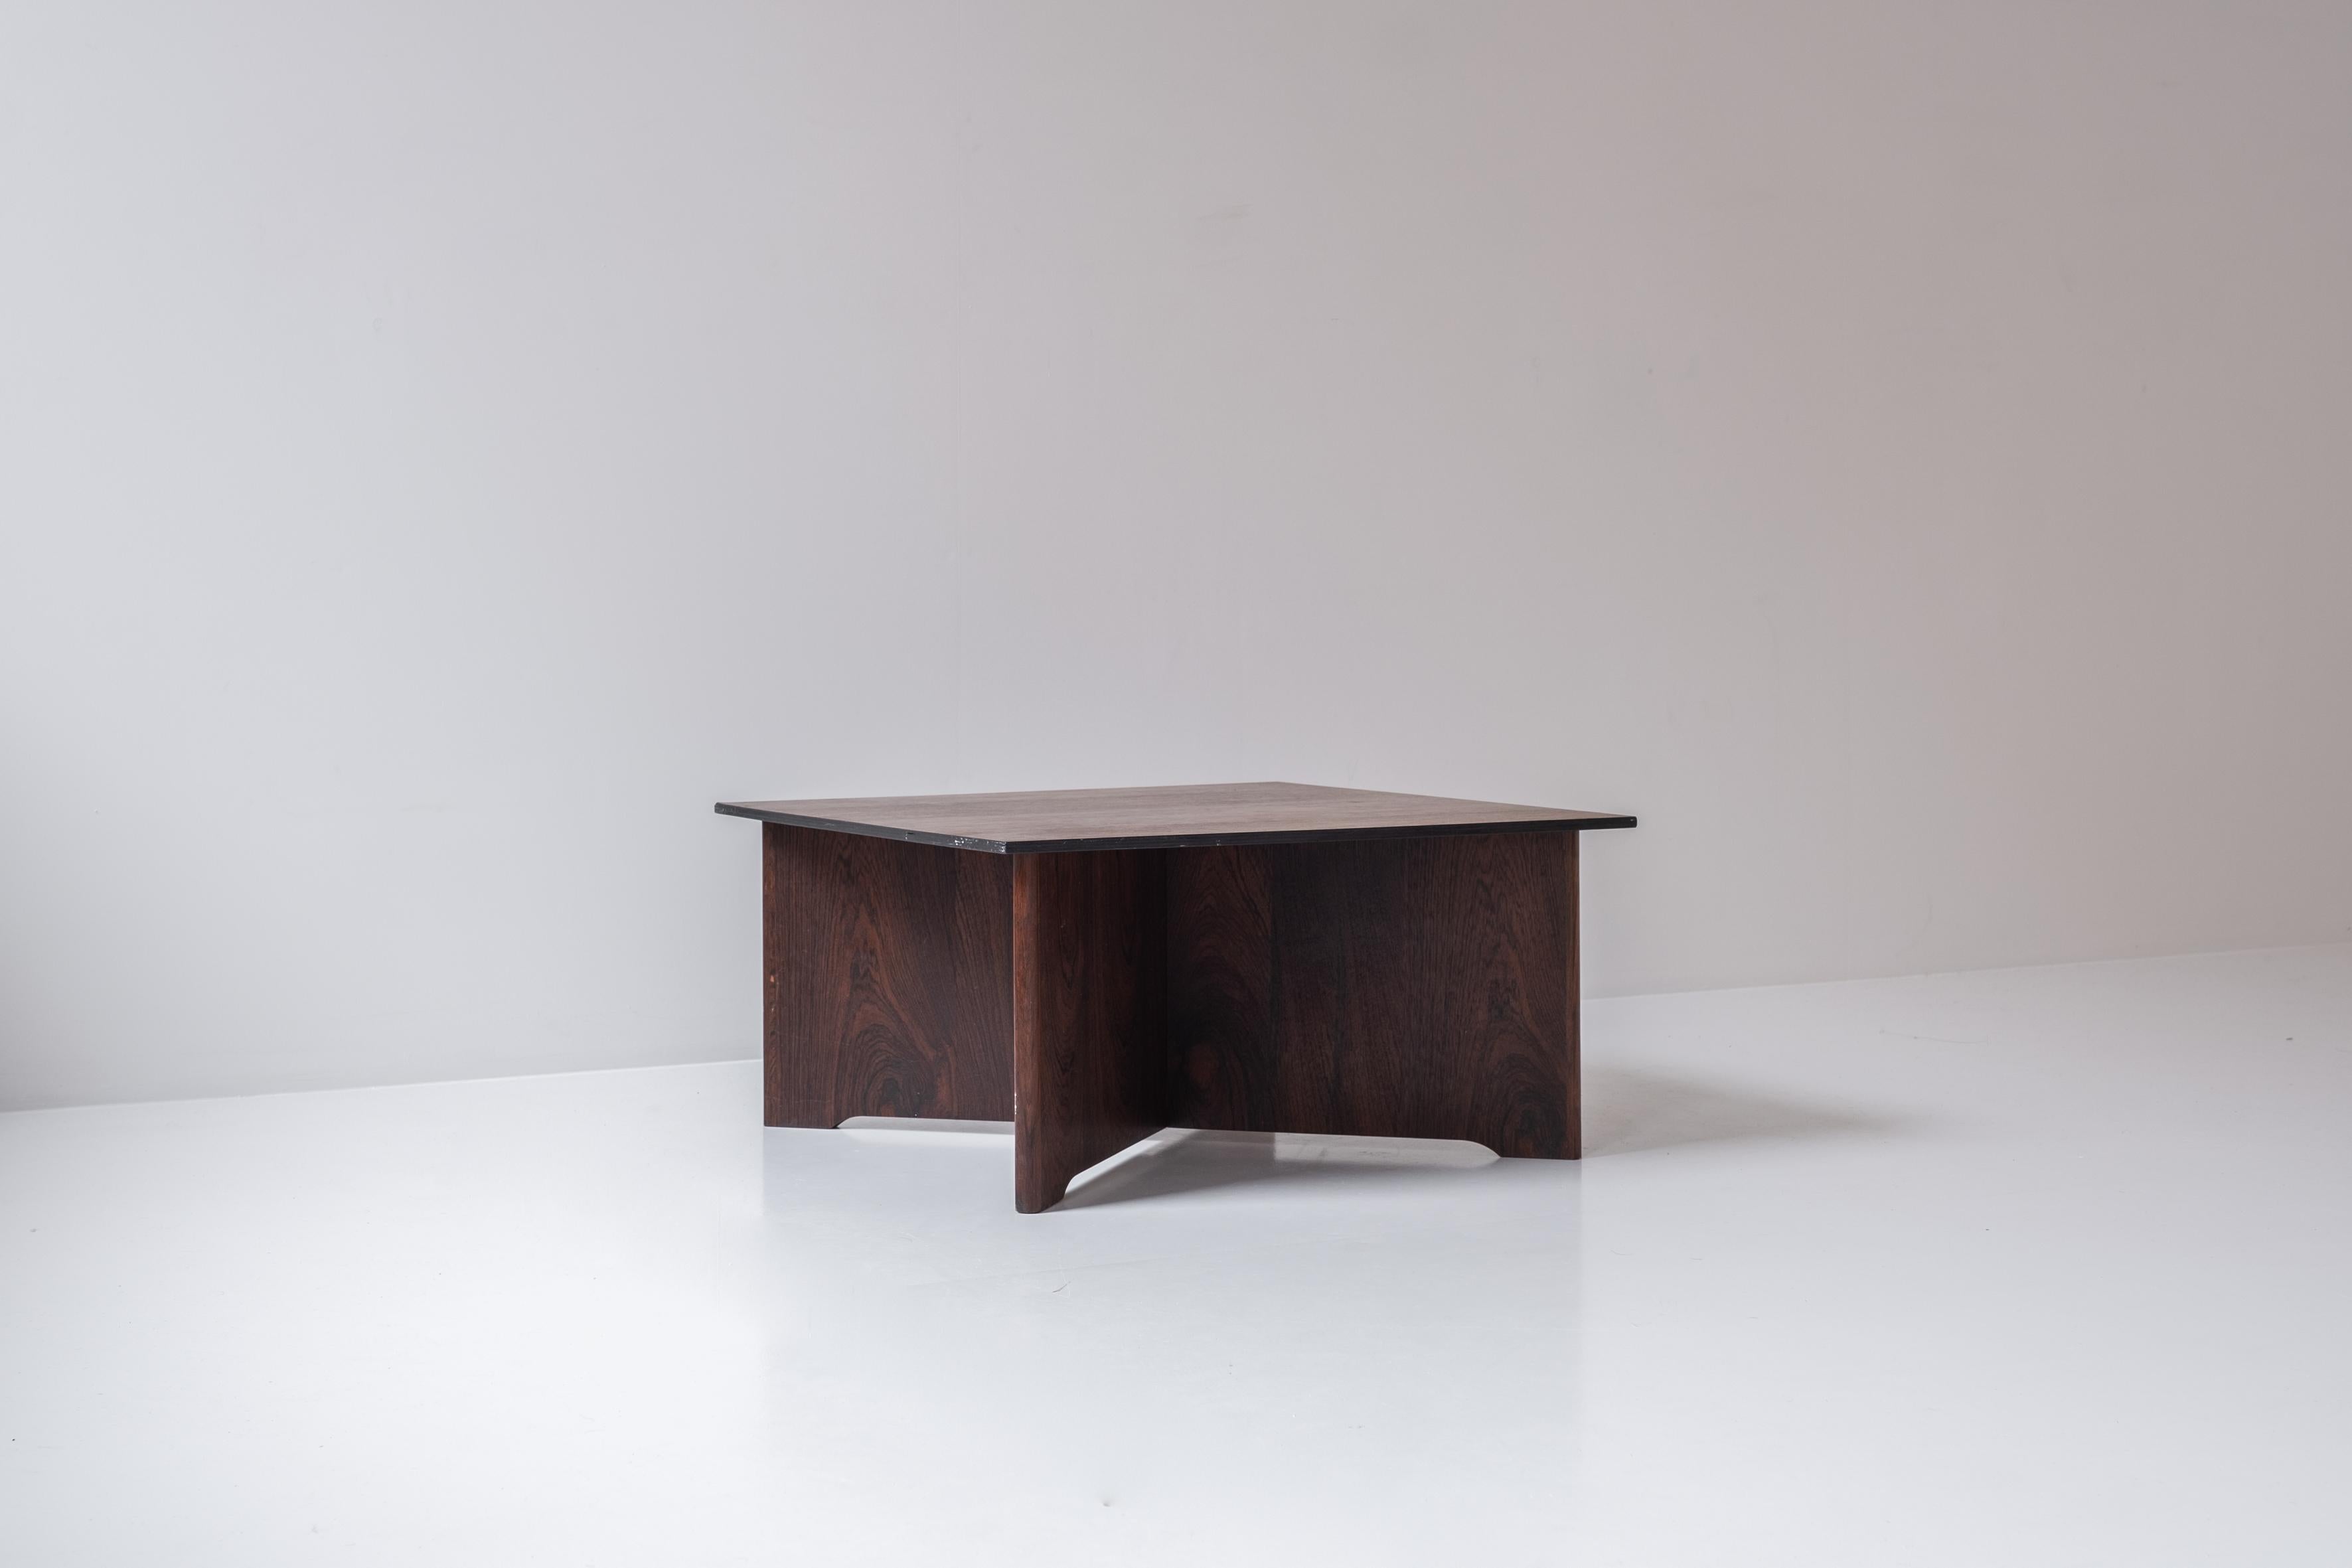 Danish Square Coffee Table from Denmark, Designed in the 1960s